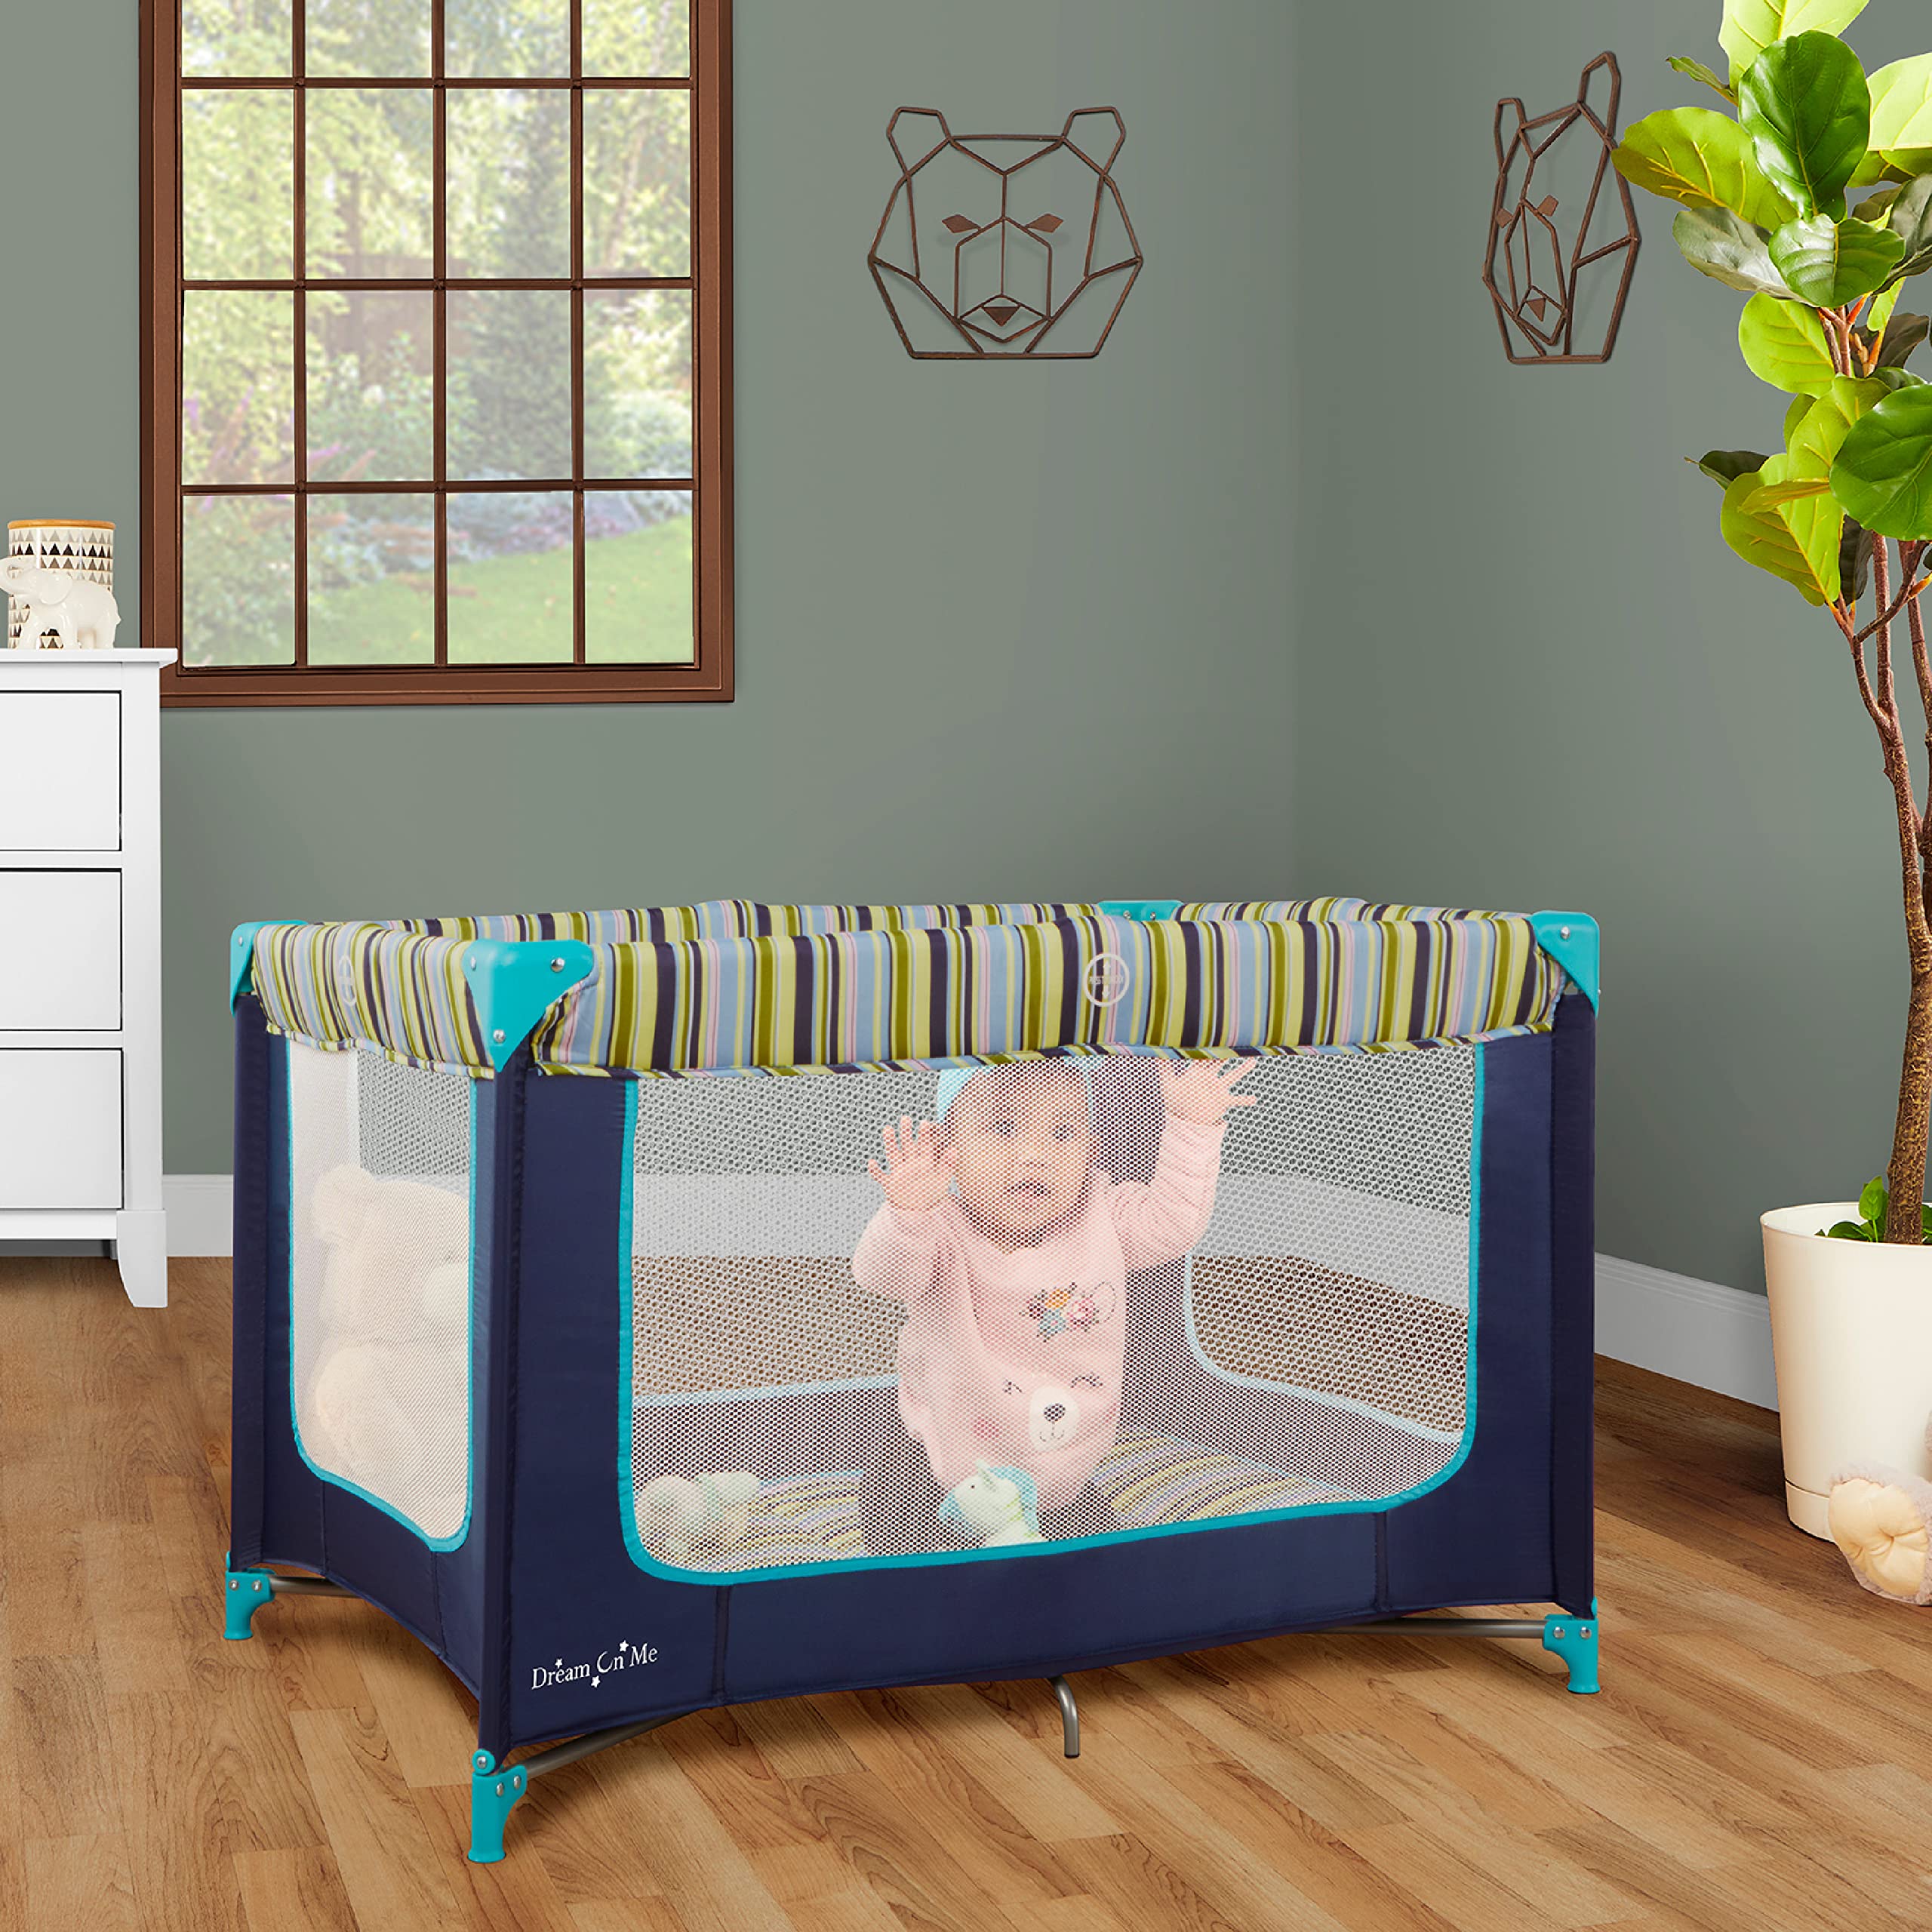 Dream On Me Zodiak Portable Playard in Navy, Lightweight, Packable and Easy Setup Baby Playard, Breathable Mesh Sides and Soft Fabric - Comes with a Removable Padded Mat